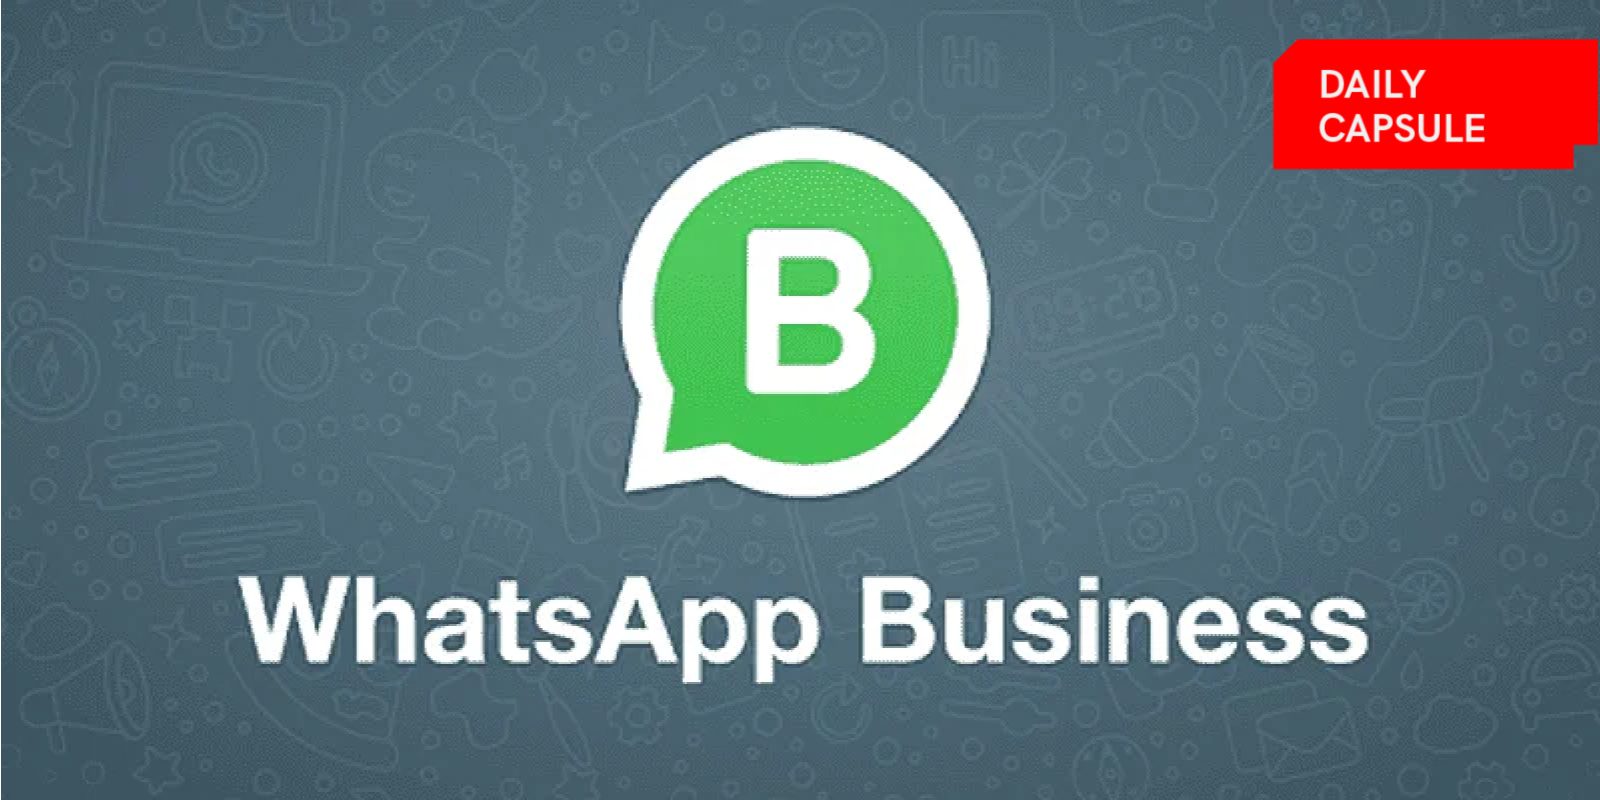 WhatsApp Business helping Indian SMBs; Inside ethical clothing line Kiniho